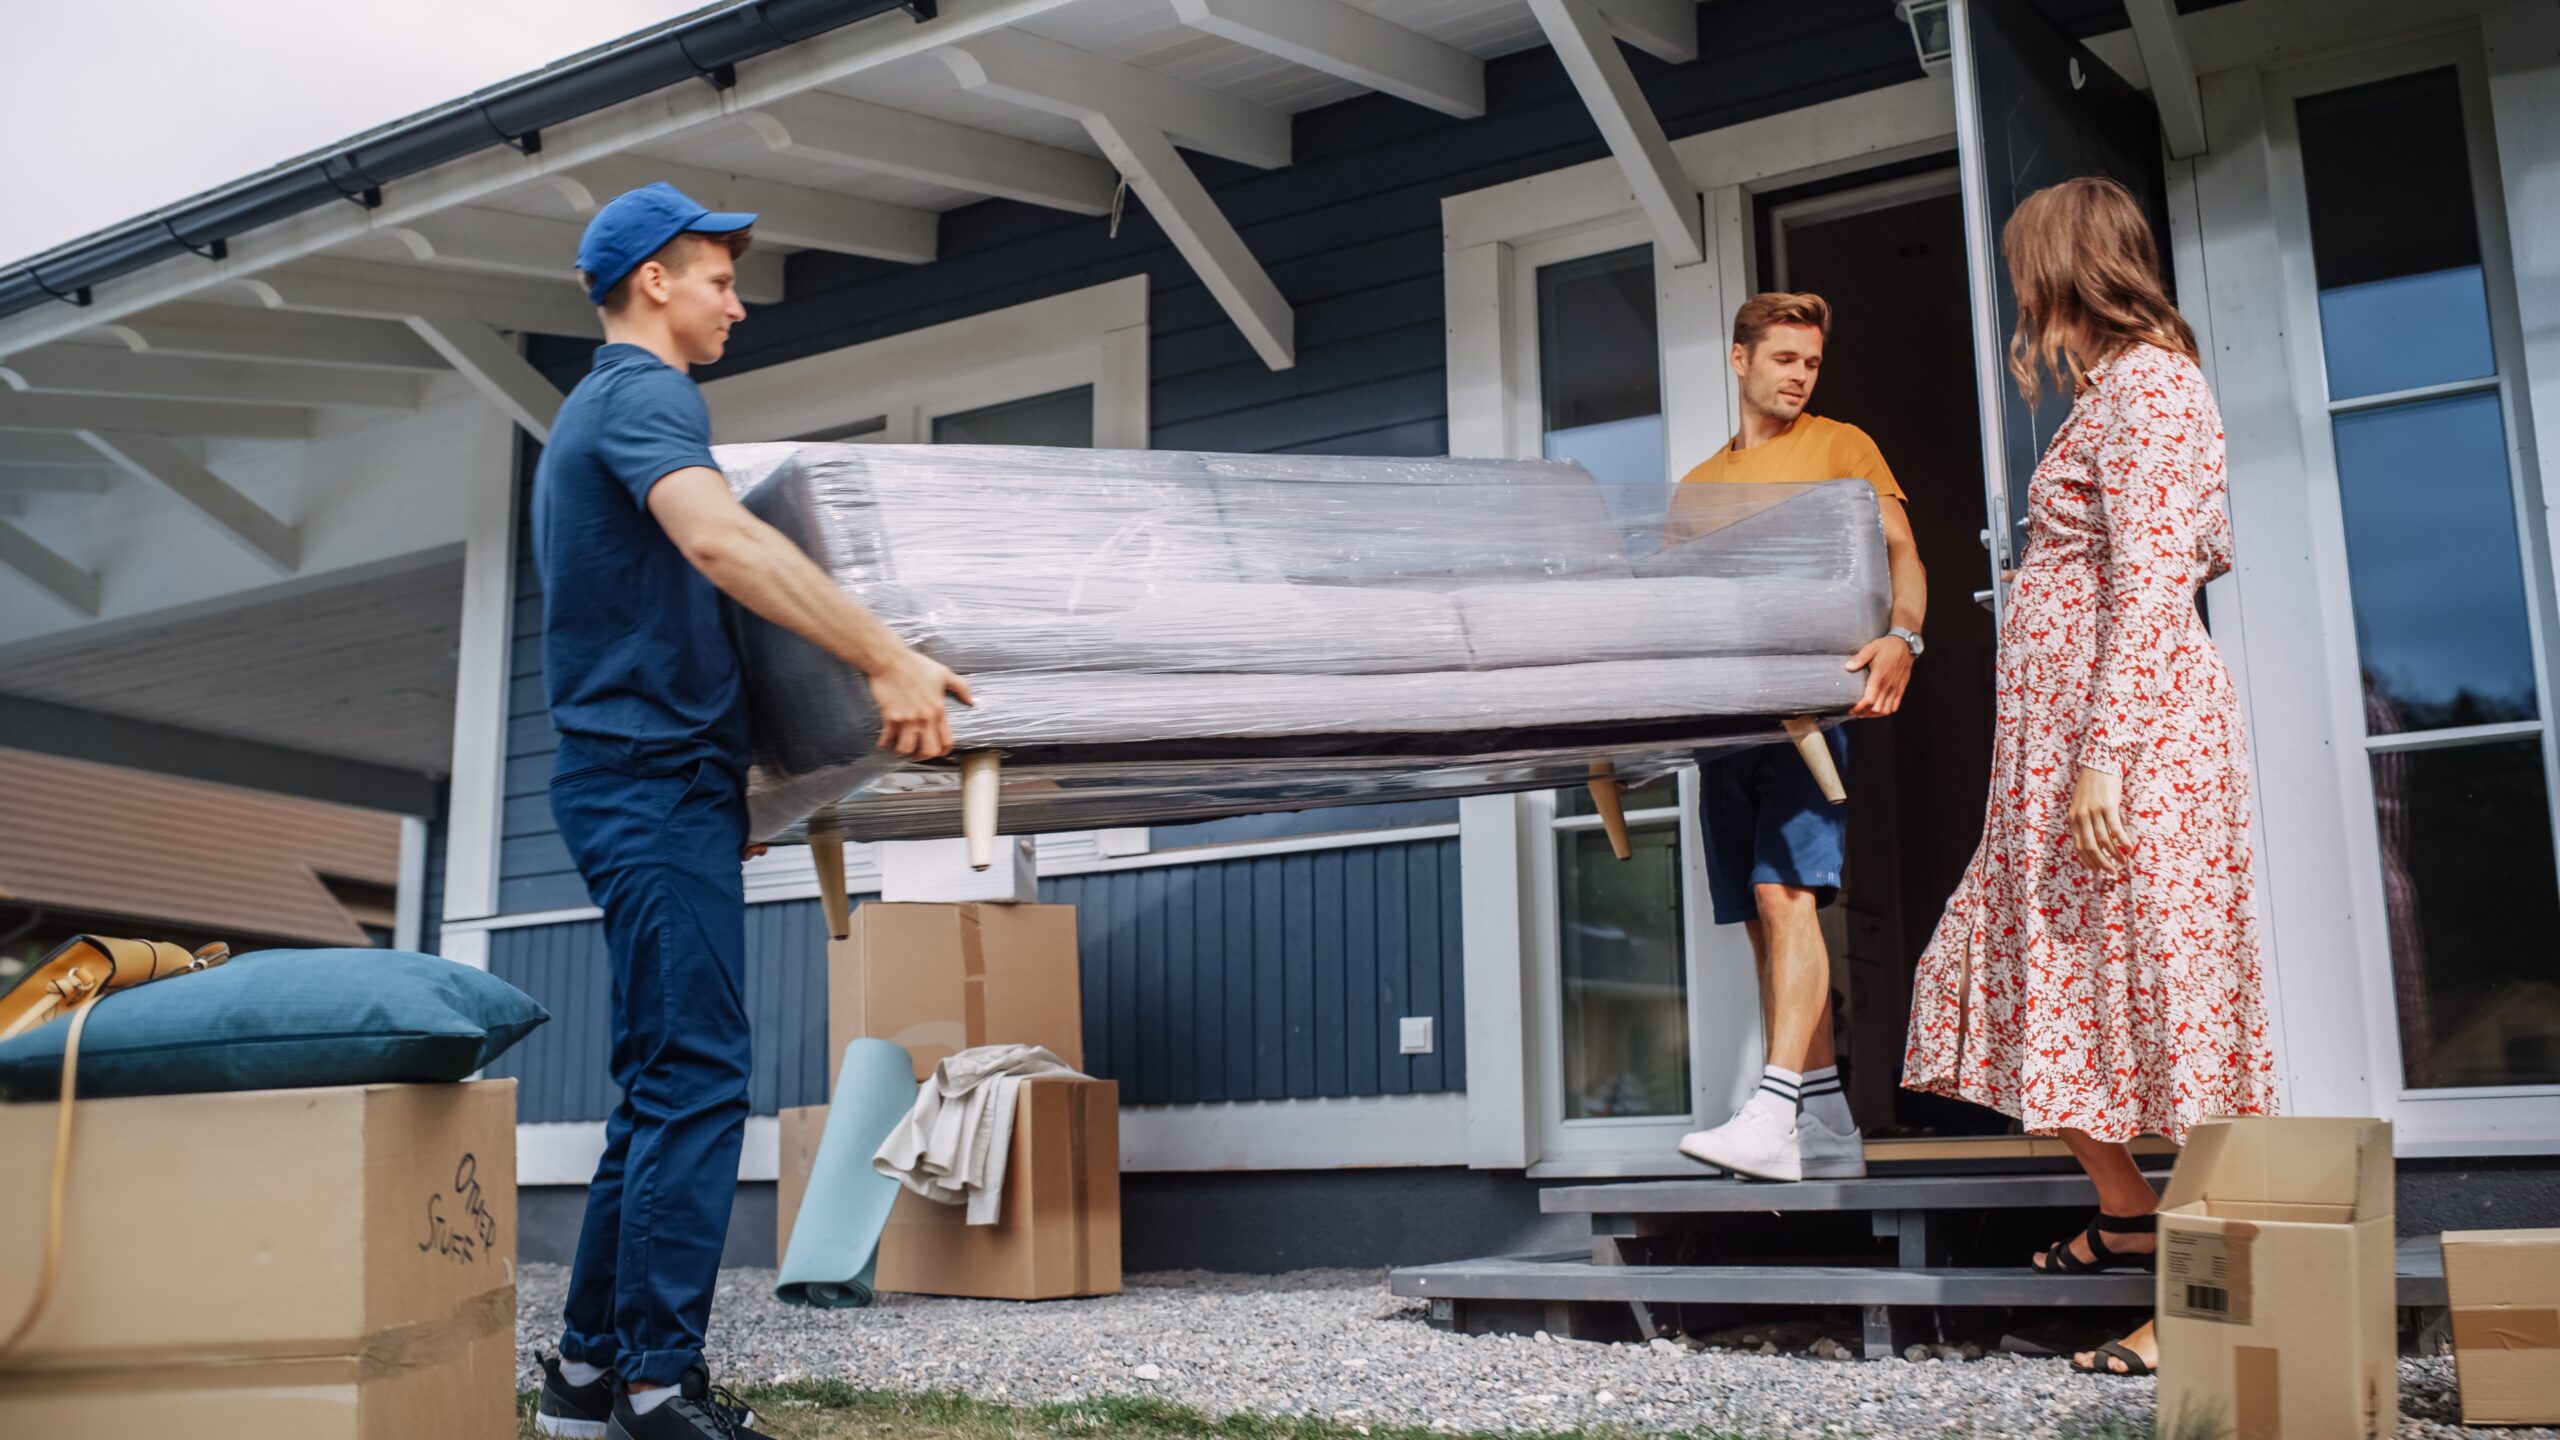 AptDeco uses its own delivery teams to move secondhand furniture